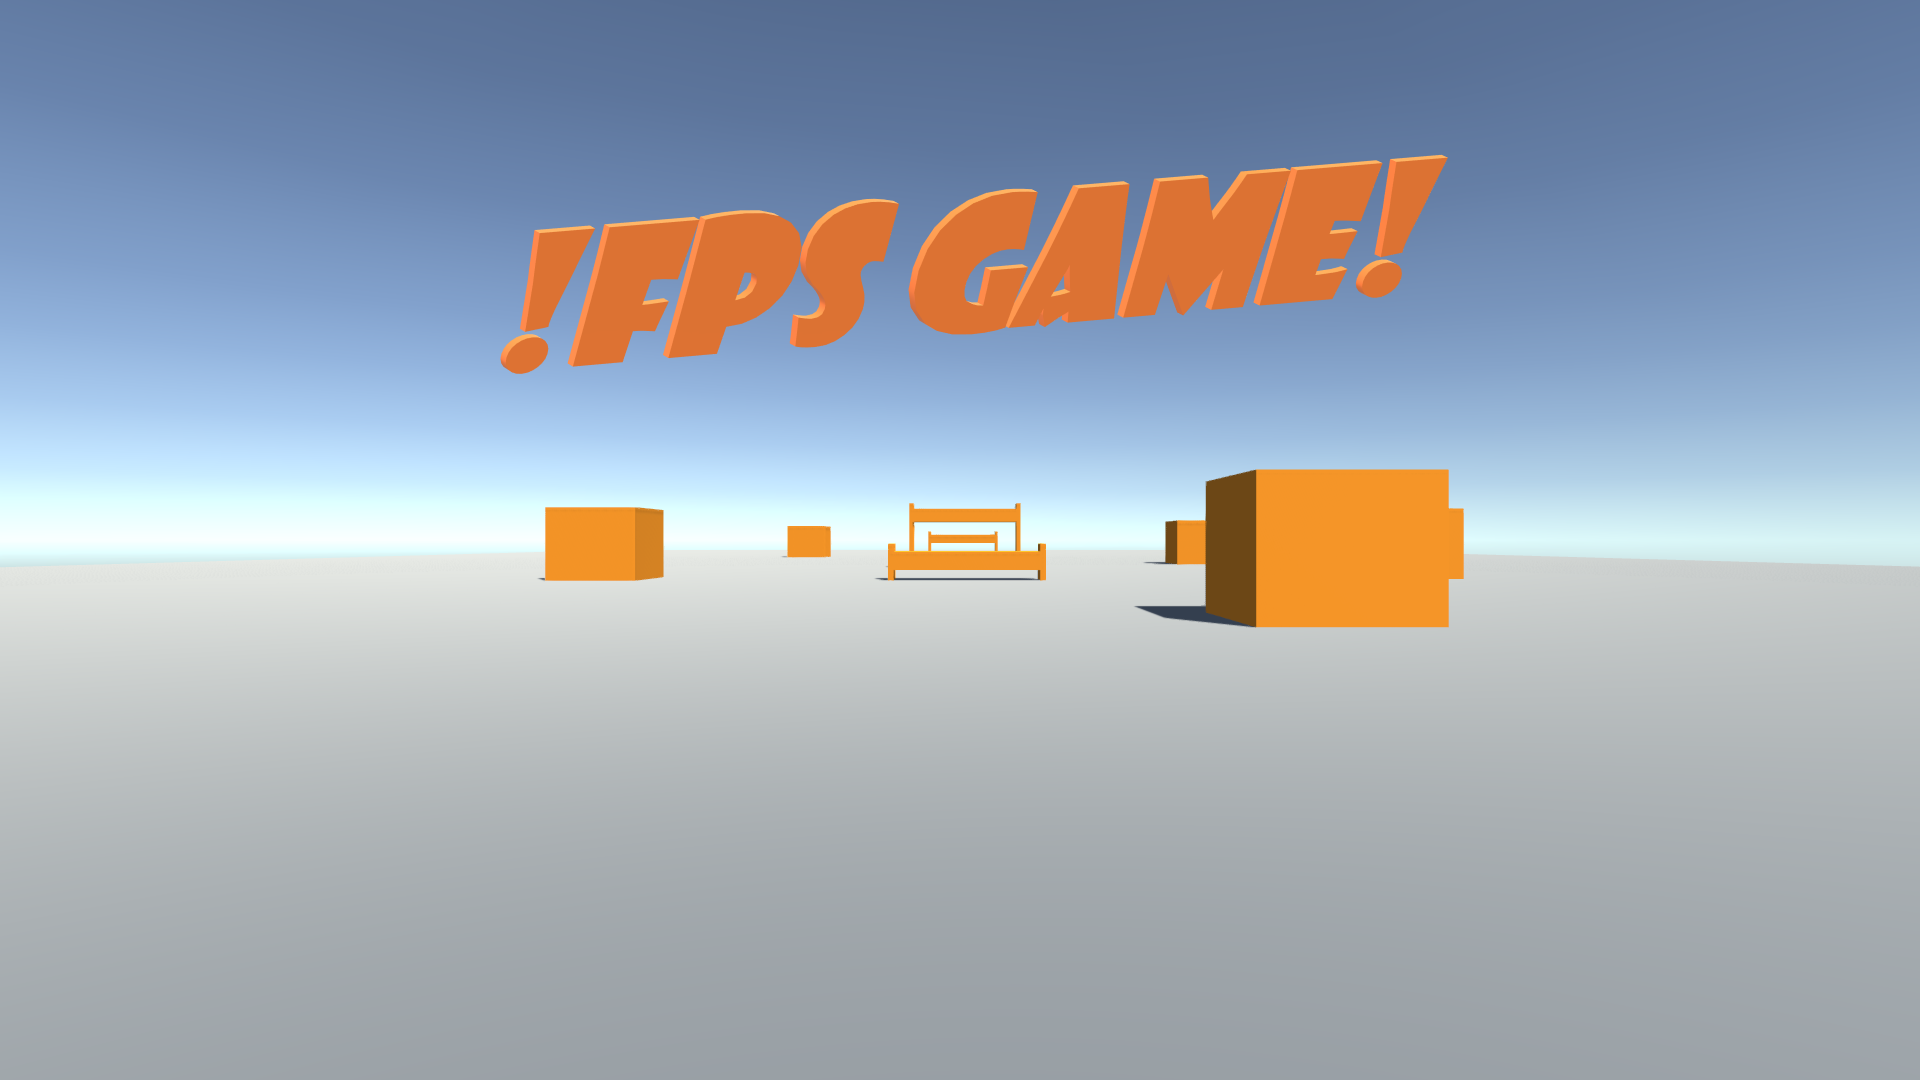 FPS game prototype by A.K